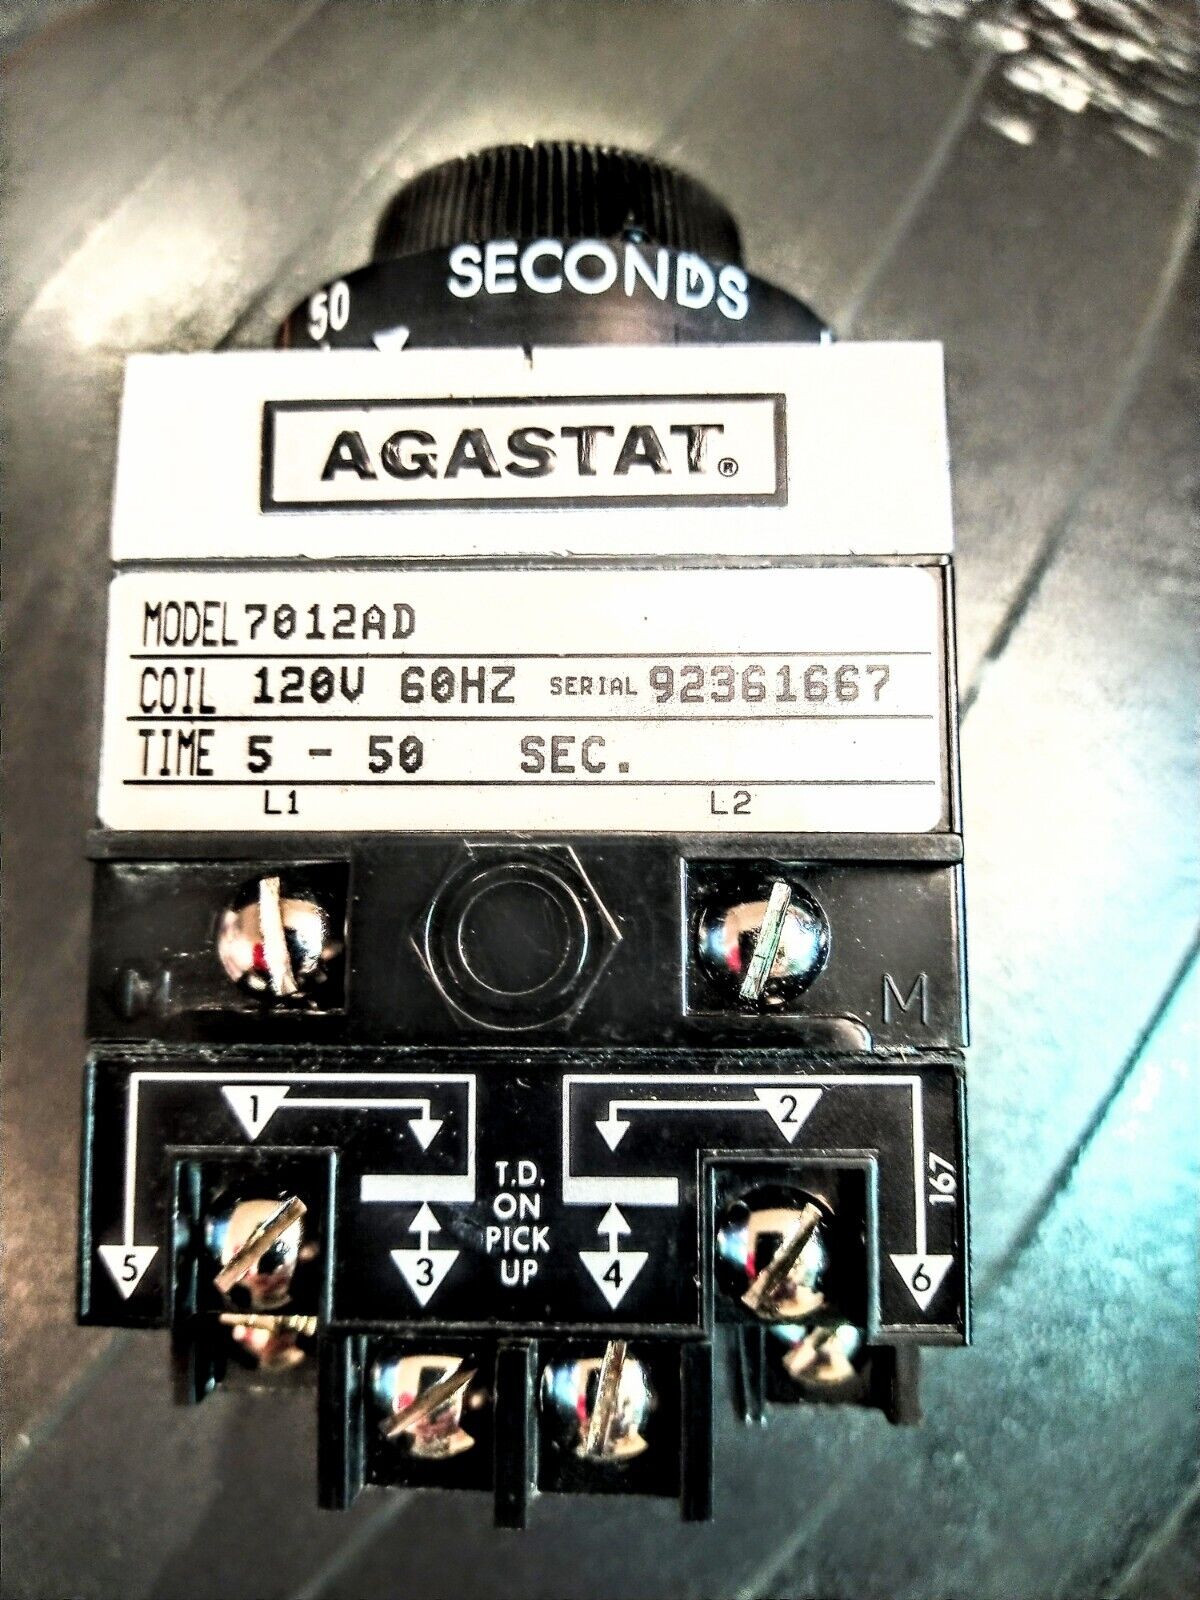 NEW Agastat Timing Relay 7012AD